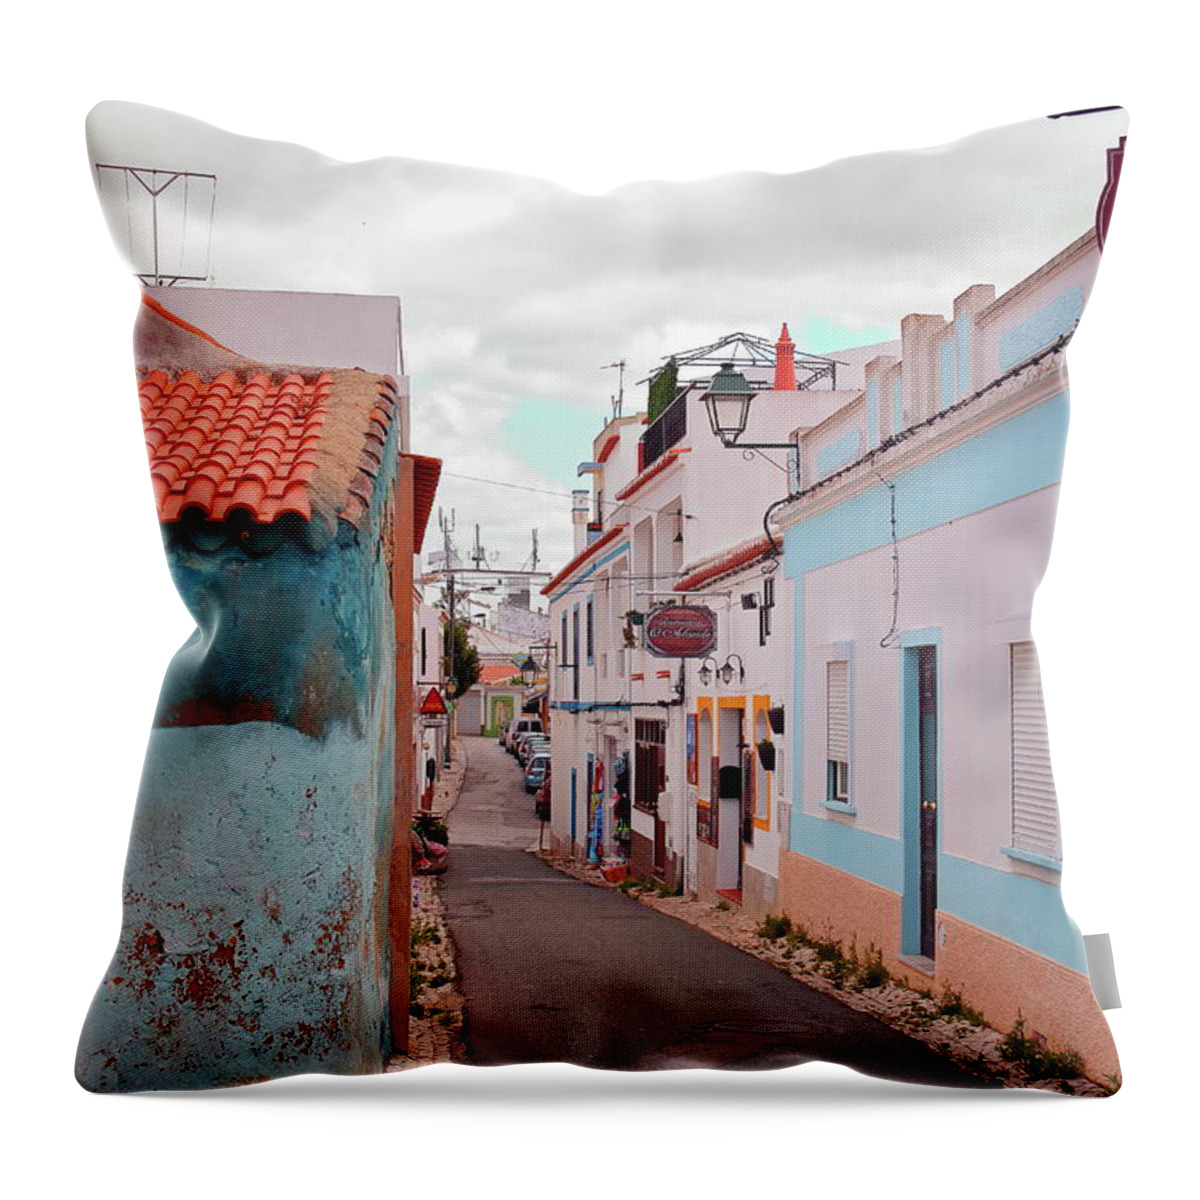 Street Throw Pillow featuring the photograph Street in Alvor Portugal by Jeff Townsend